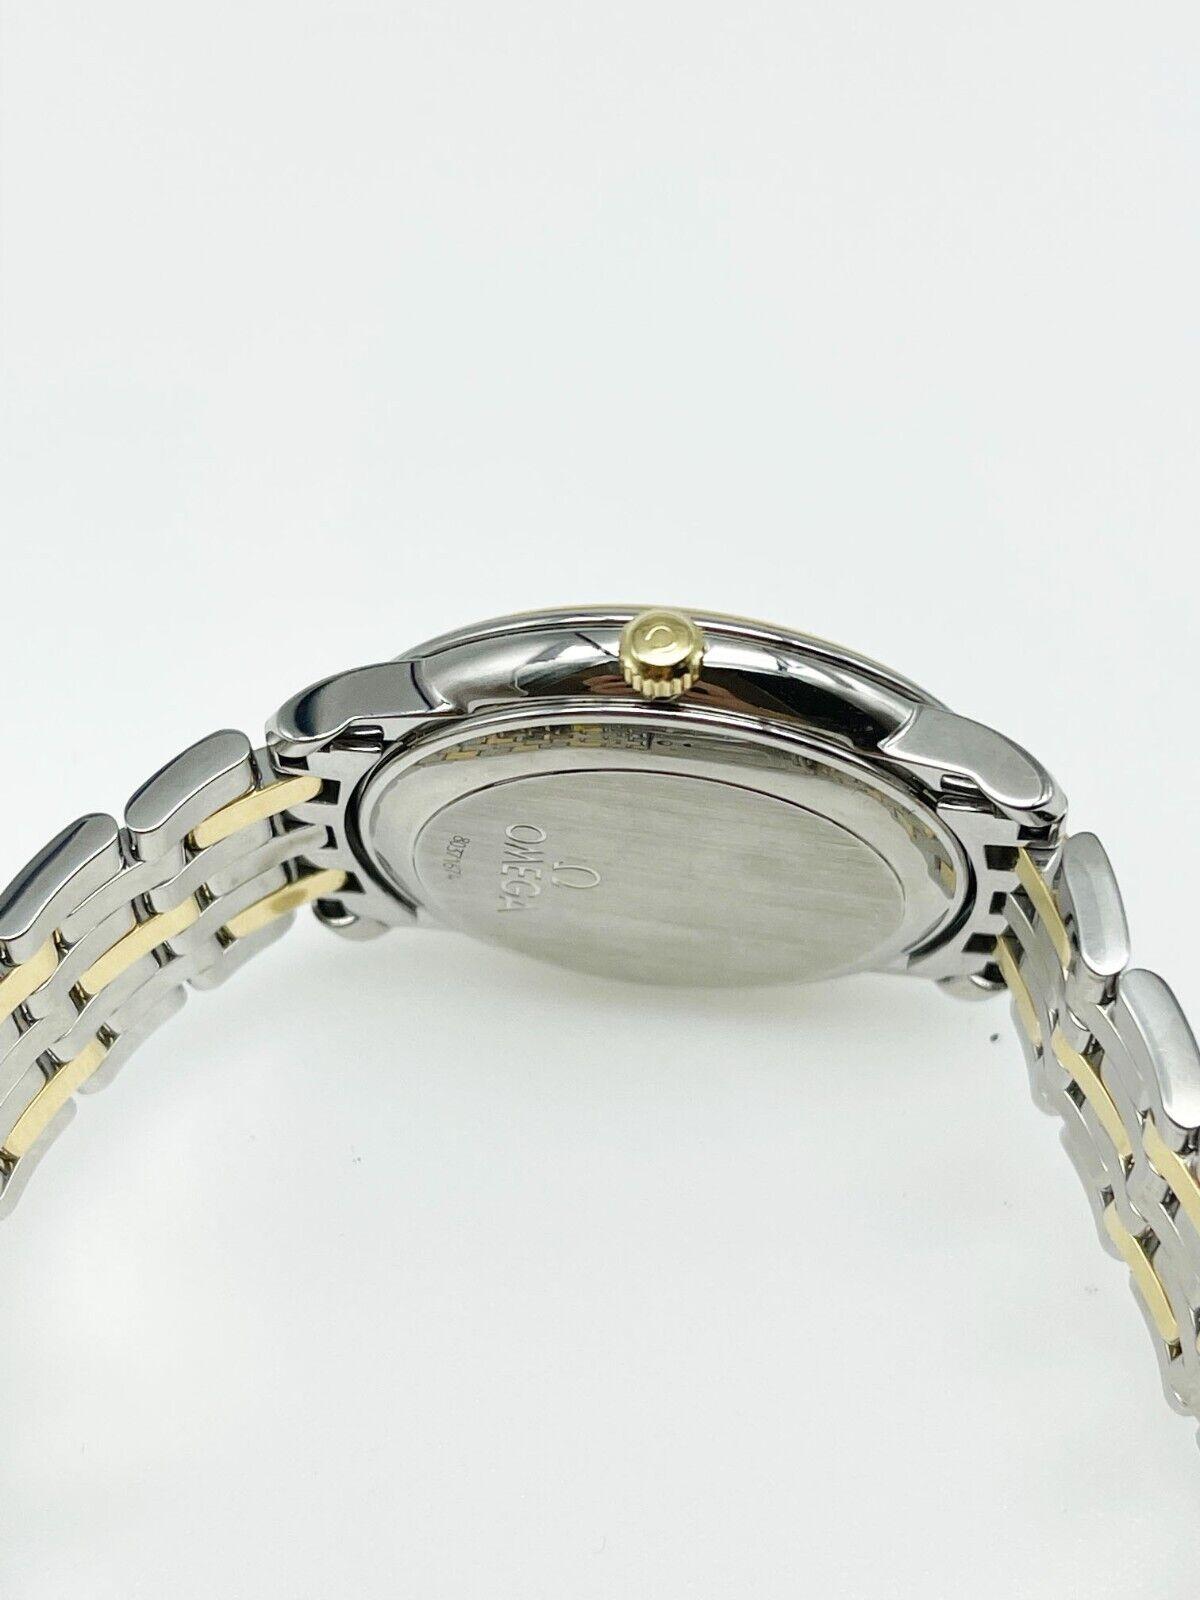 Omega De Ville 4300.11.00 Champagne Dial 18k Gold Steel Box Paper In Excellent Condition For Sale In San Diego, CA